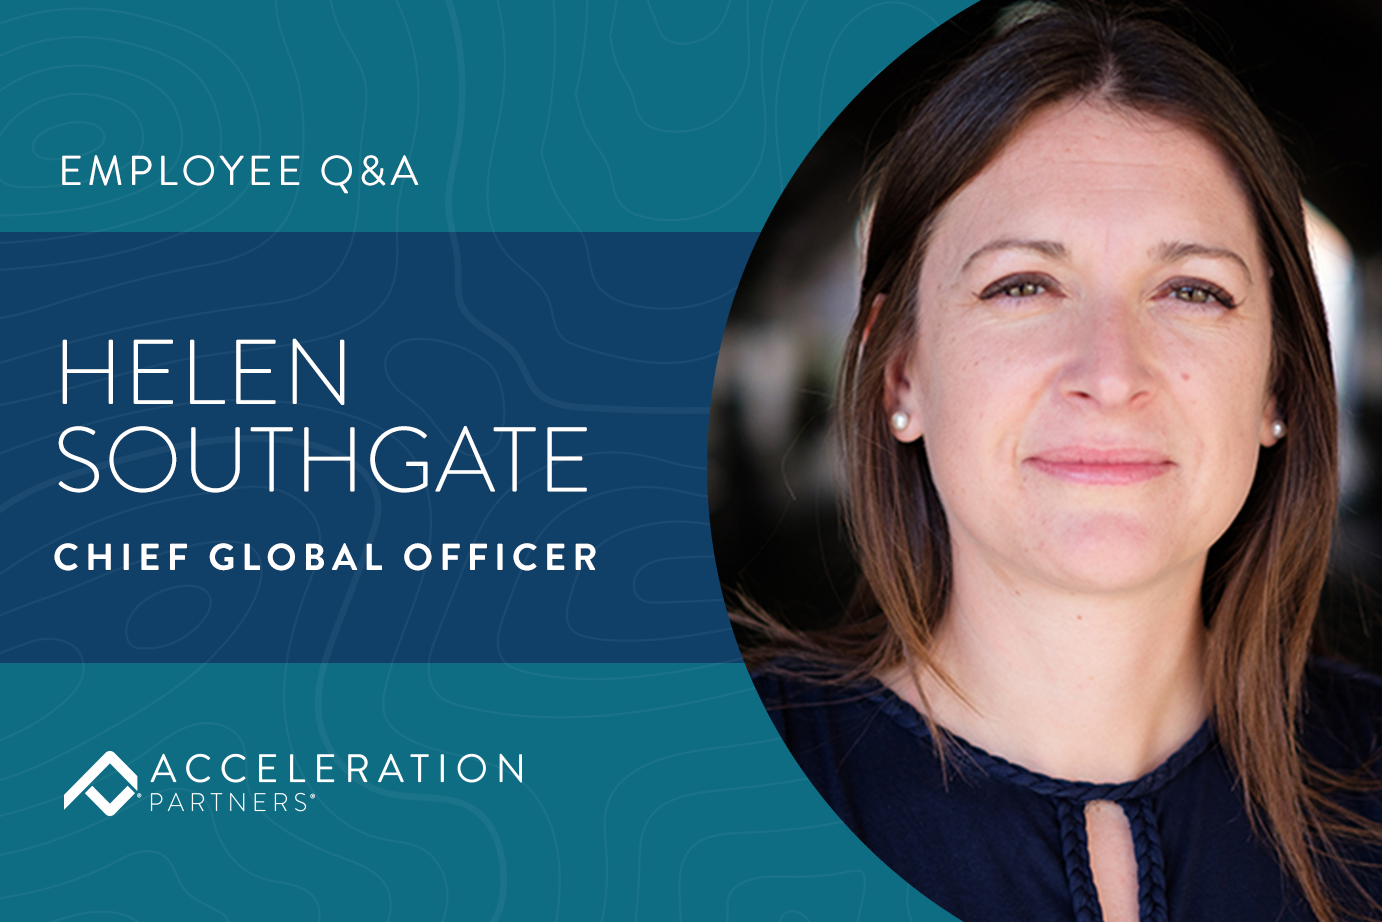 Q&A with Helen Southgate: Scaling the Next Stage of AP's Global Growth